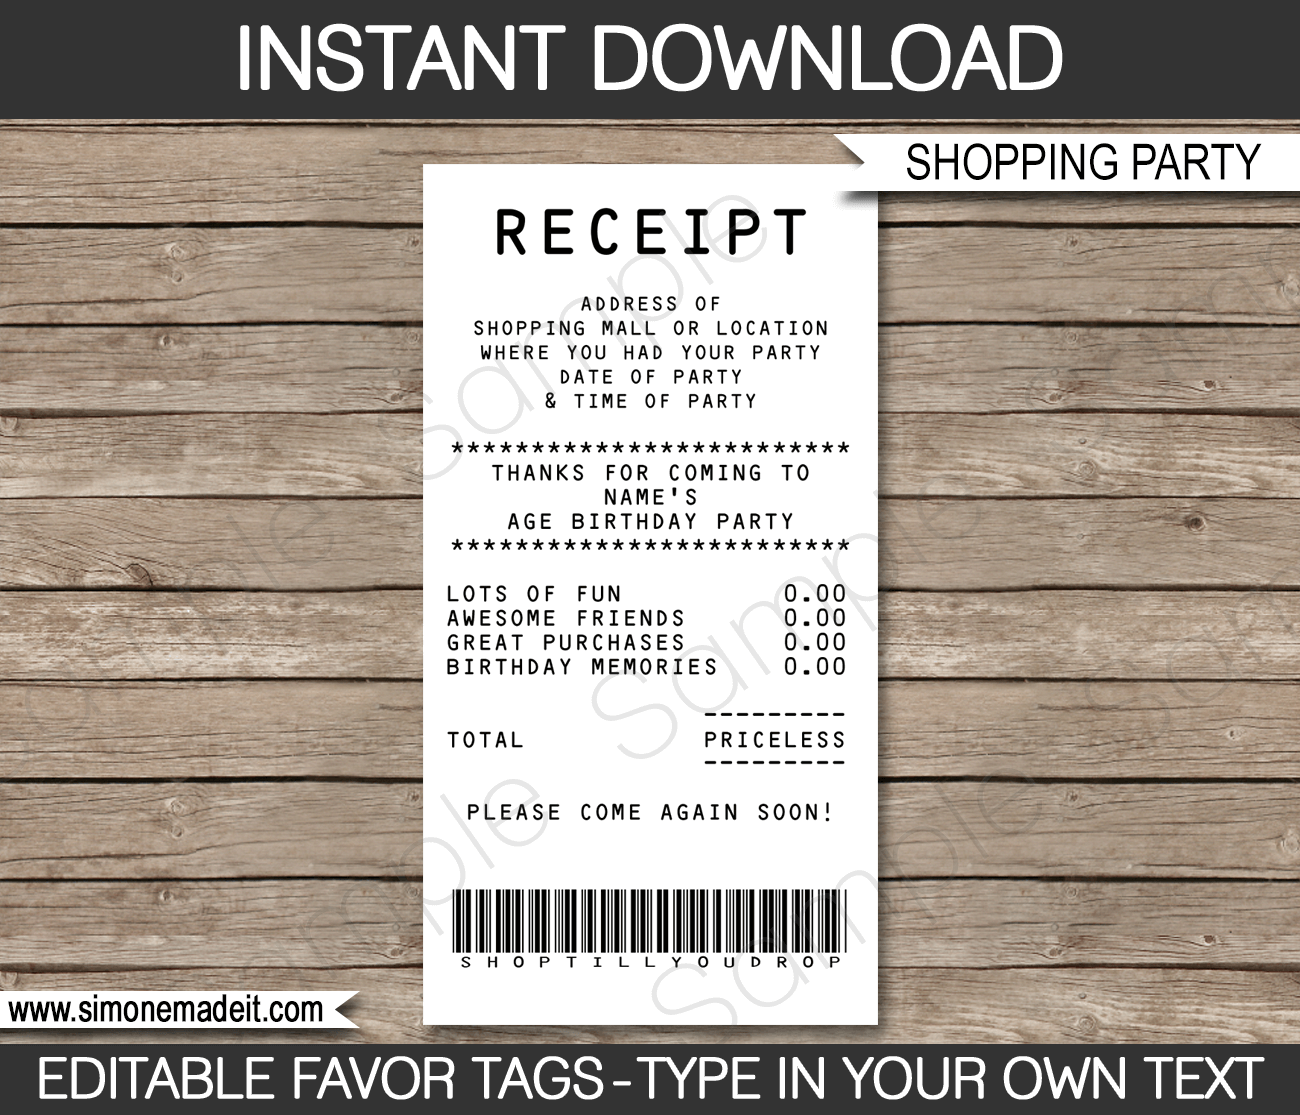 credit-card-receipt-favor-tags-receipt-tags-thank-you-tags